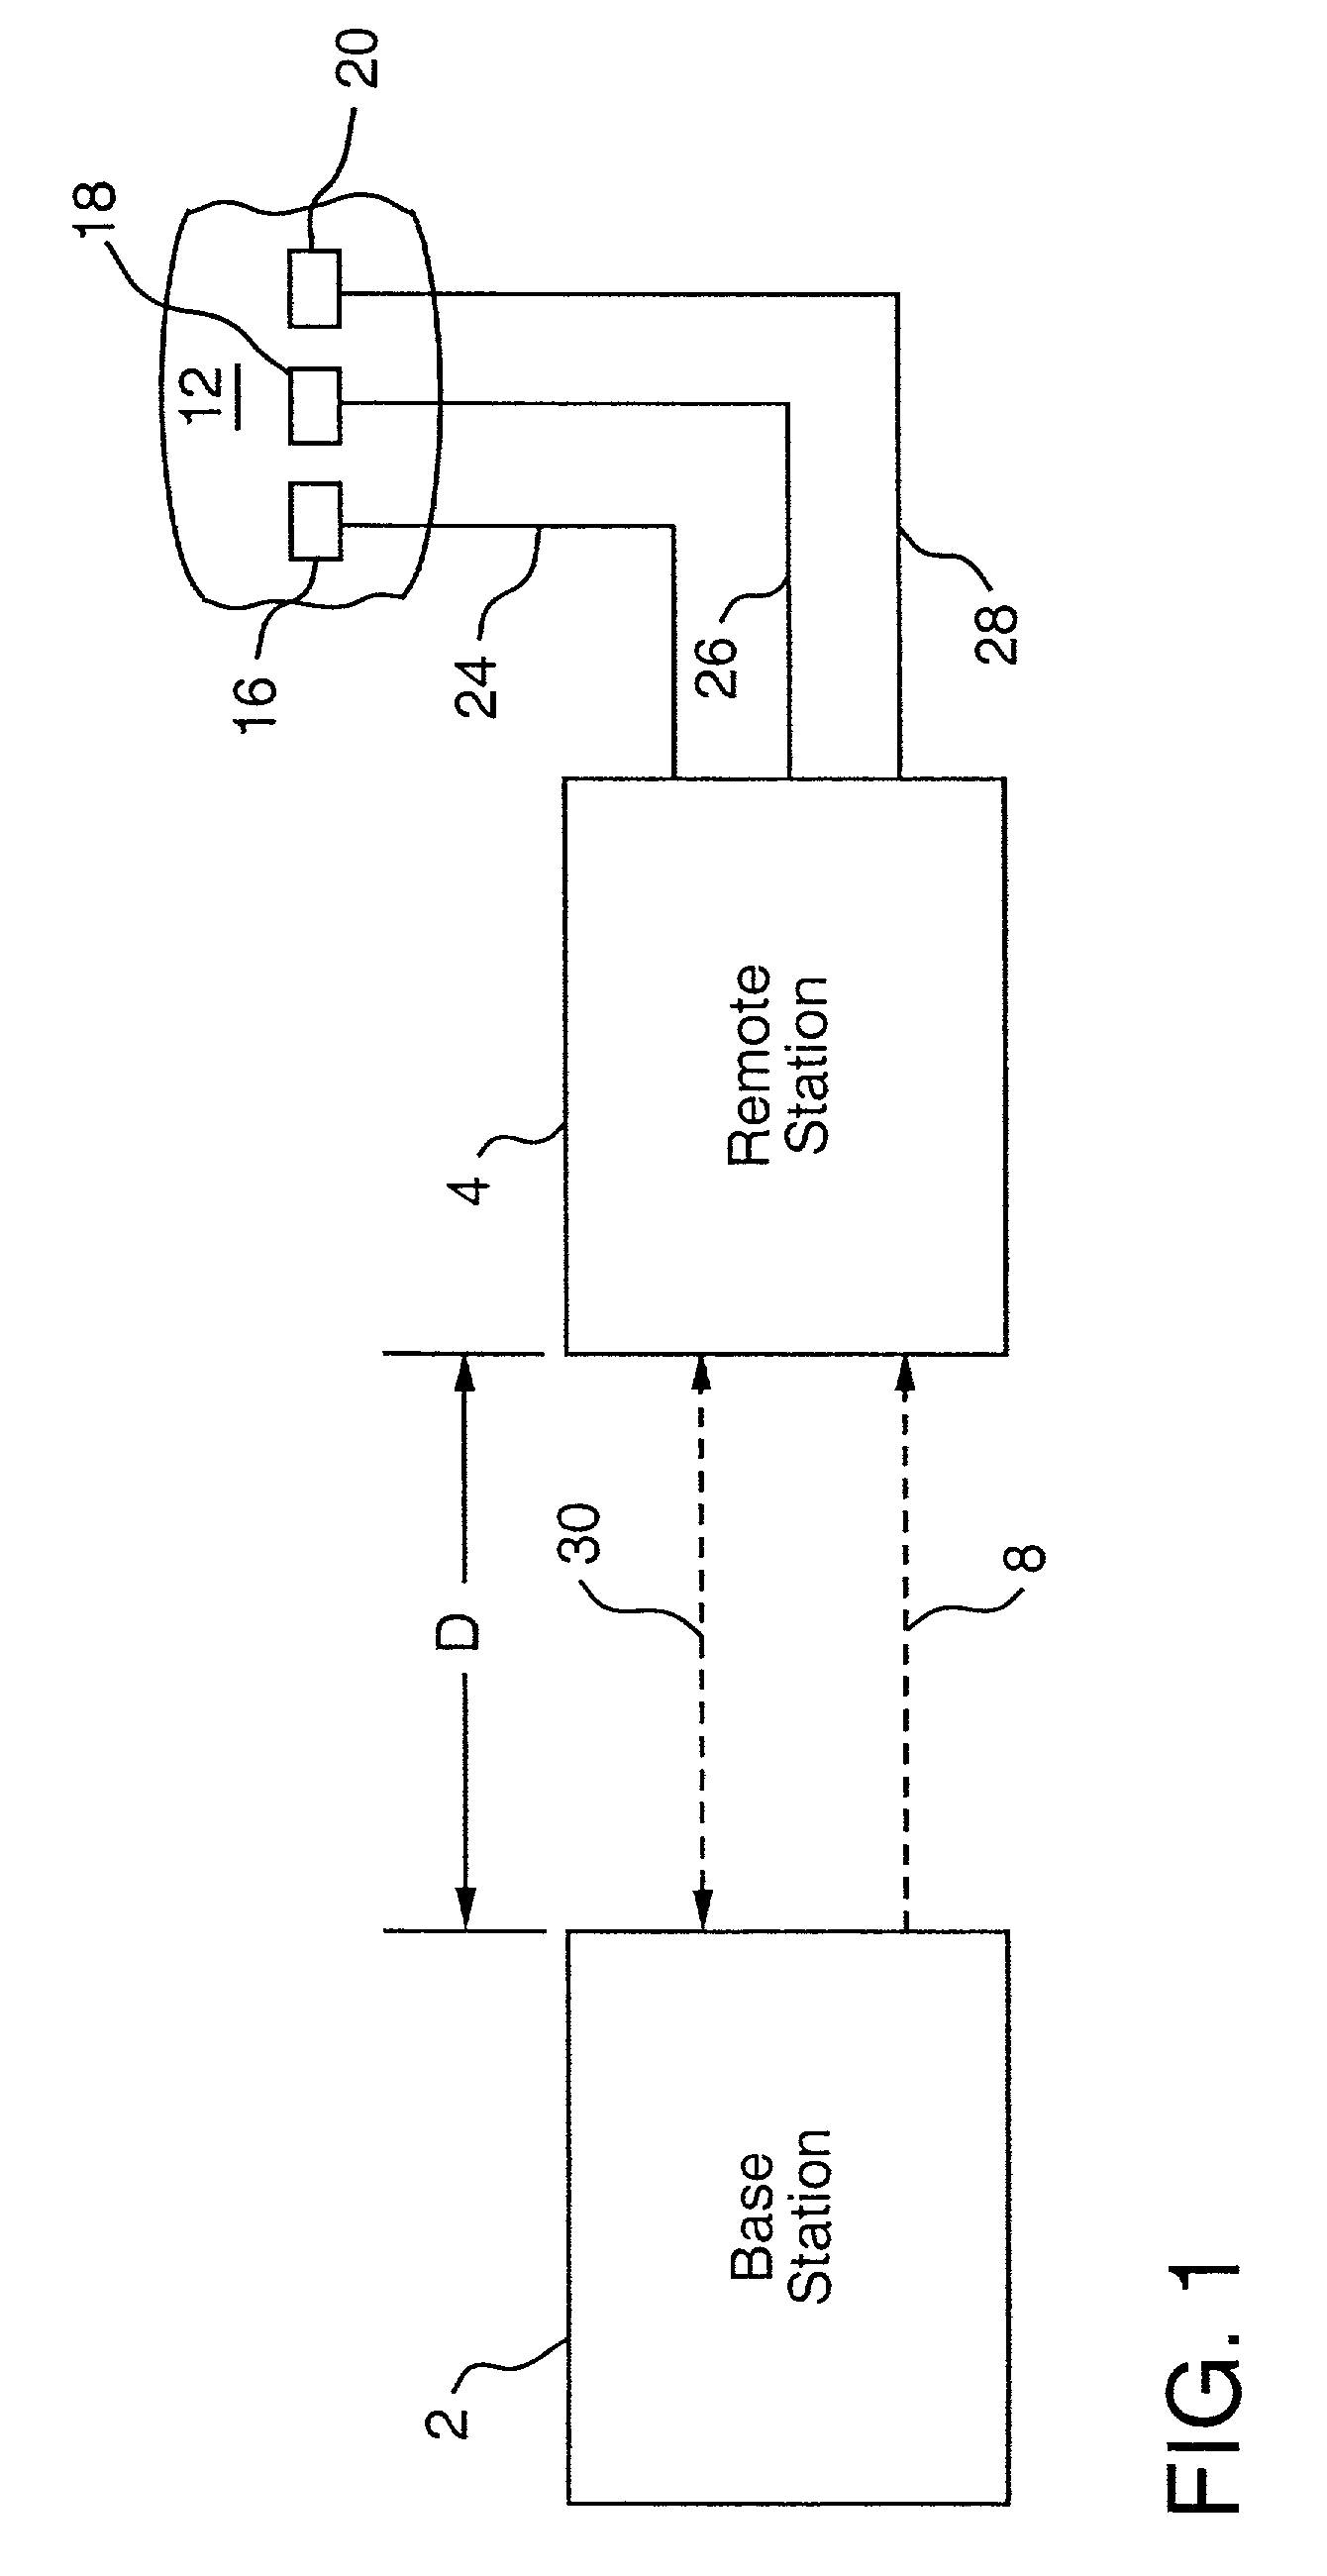 Apparatus for energizing a remote station and related method